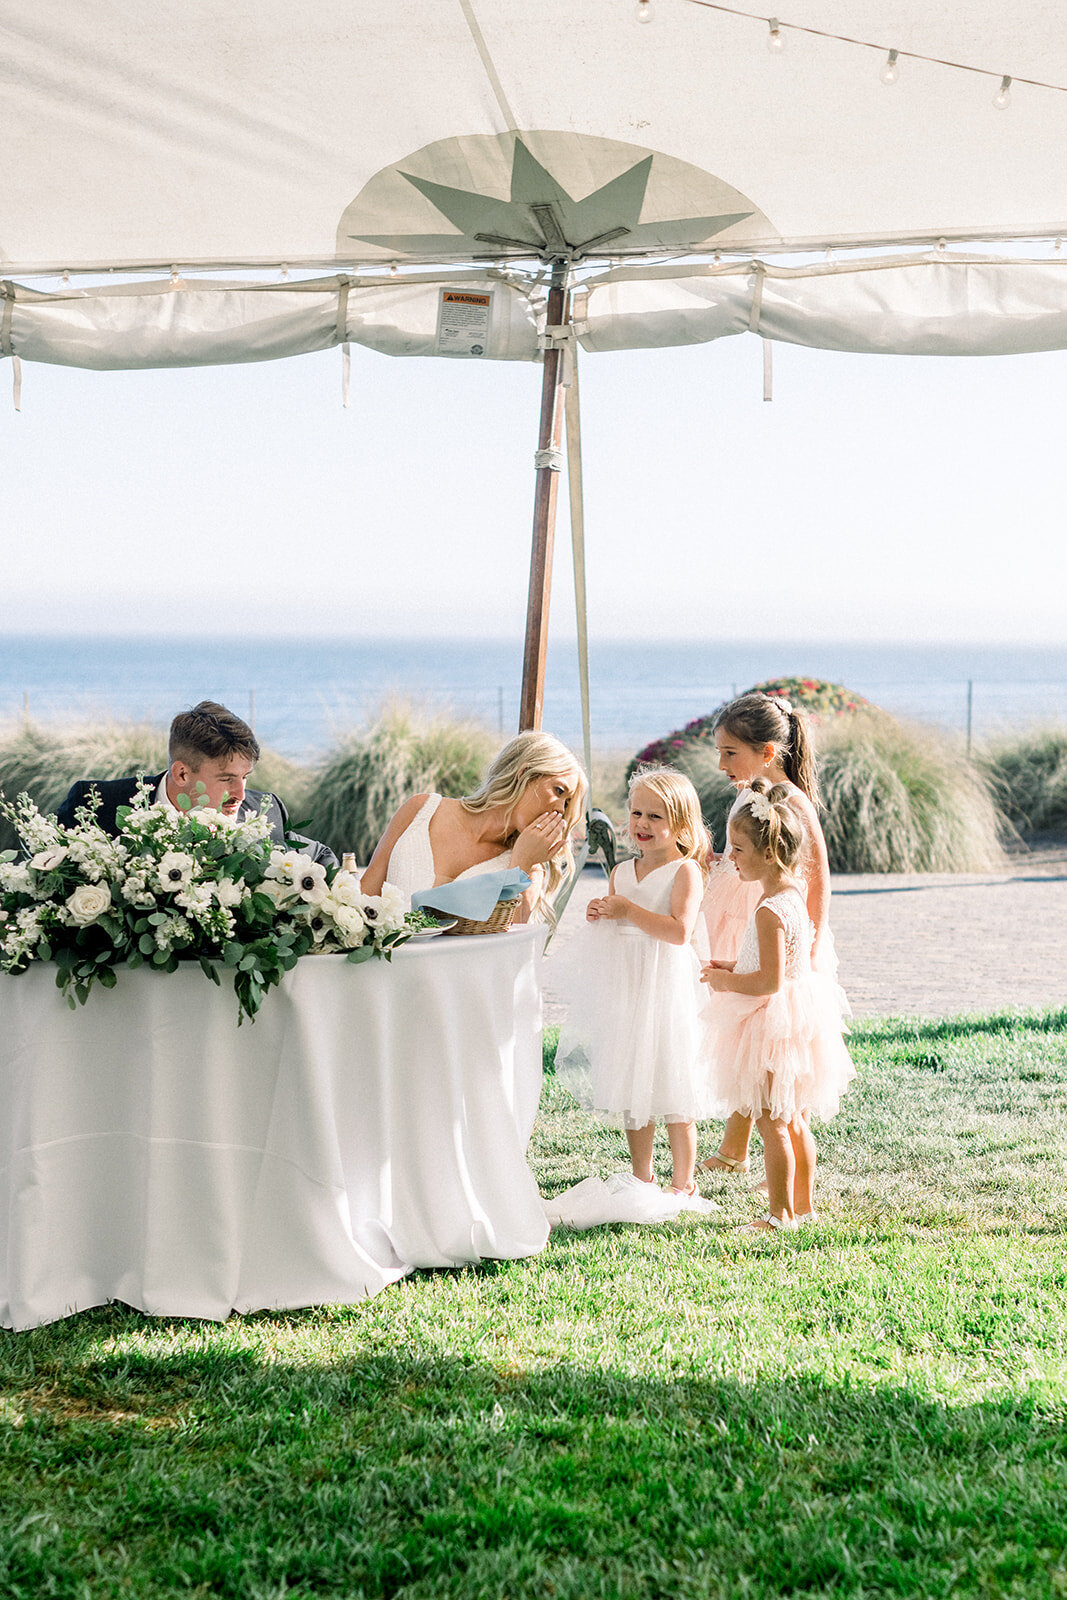 Sweetheart wedding table at Dolphin Bay Resort in Pismo Beach, CA